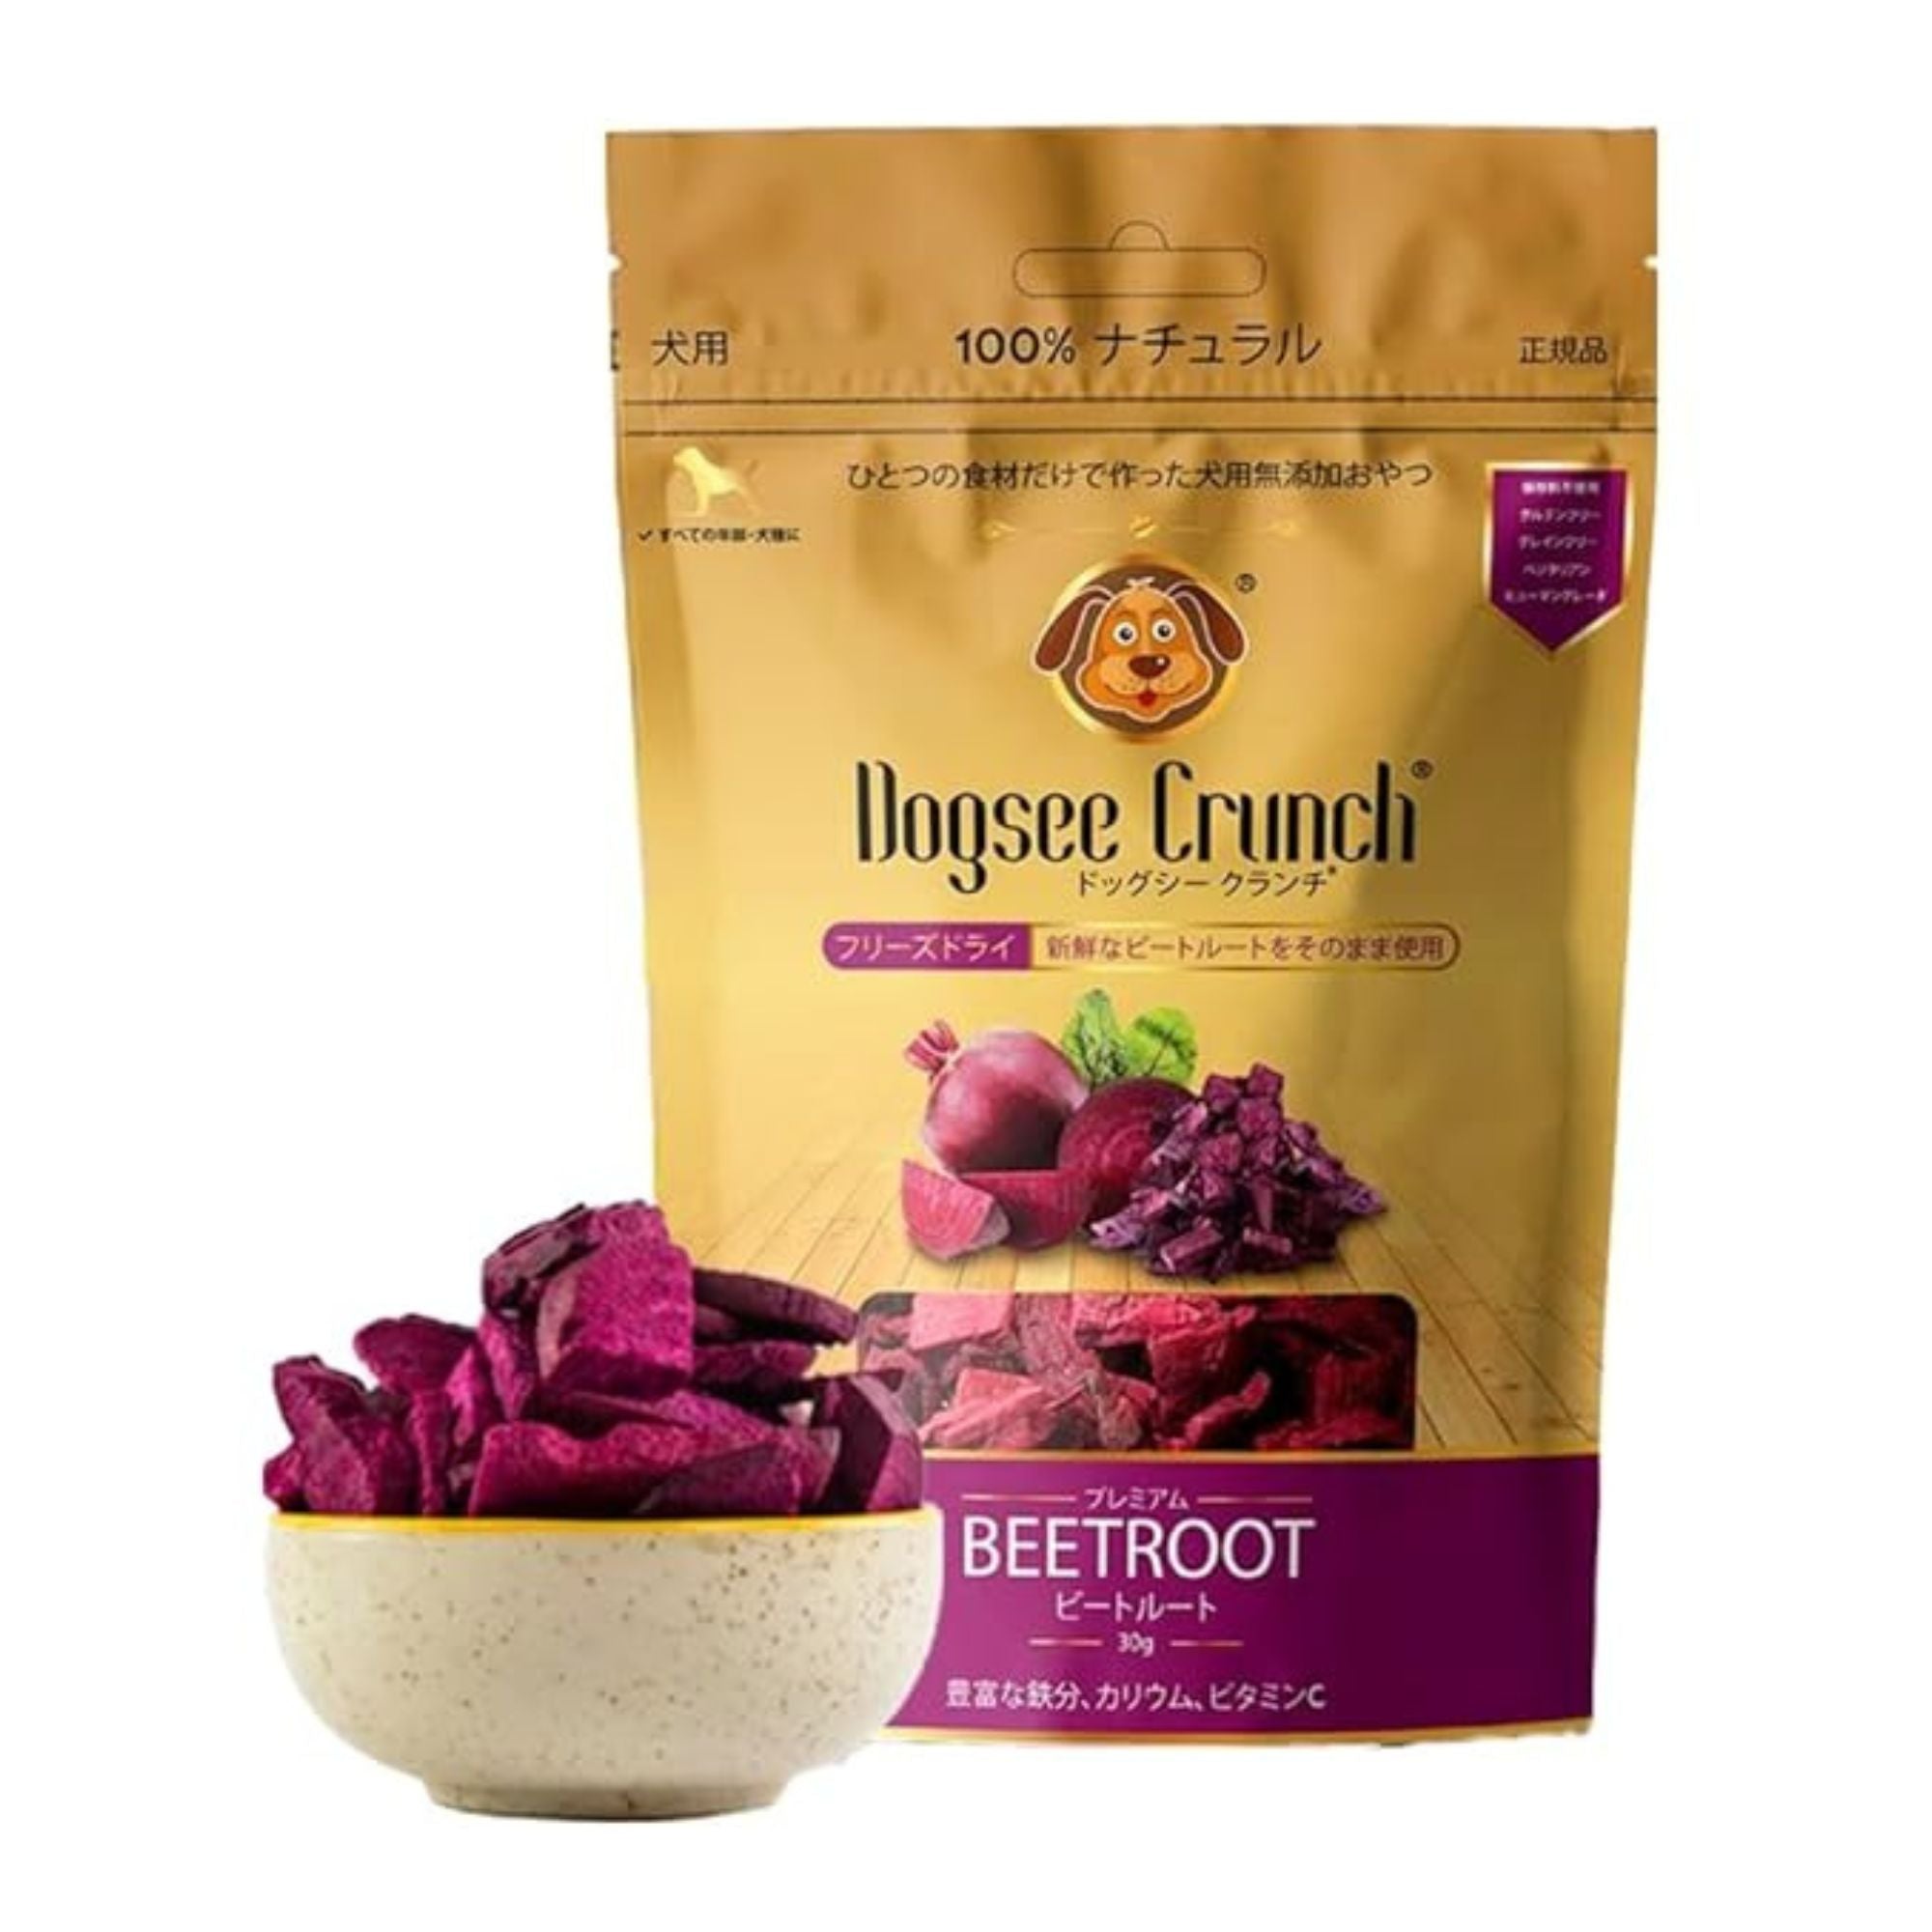 Dogsee Crunch Freeze Dried Beetroot | Barks & Bunnies